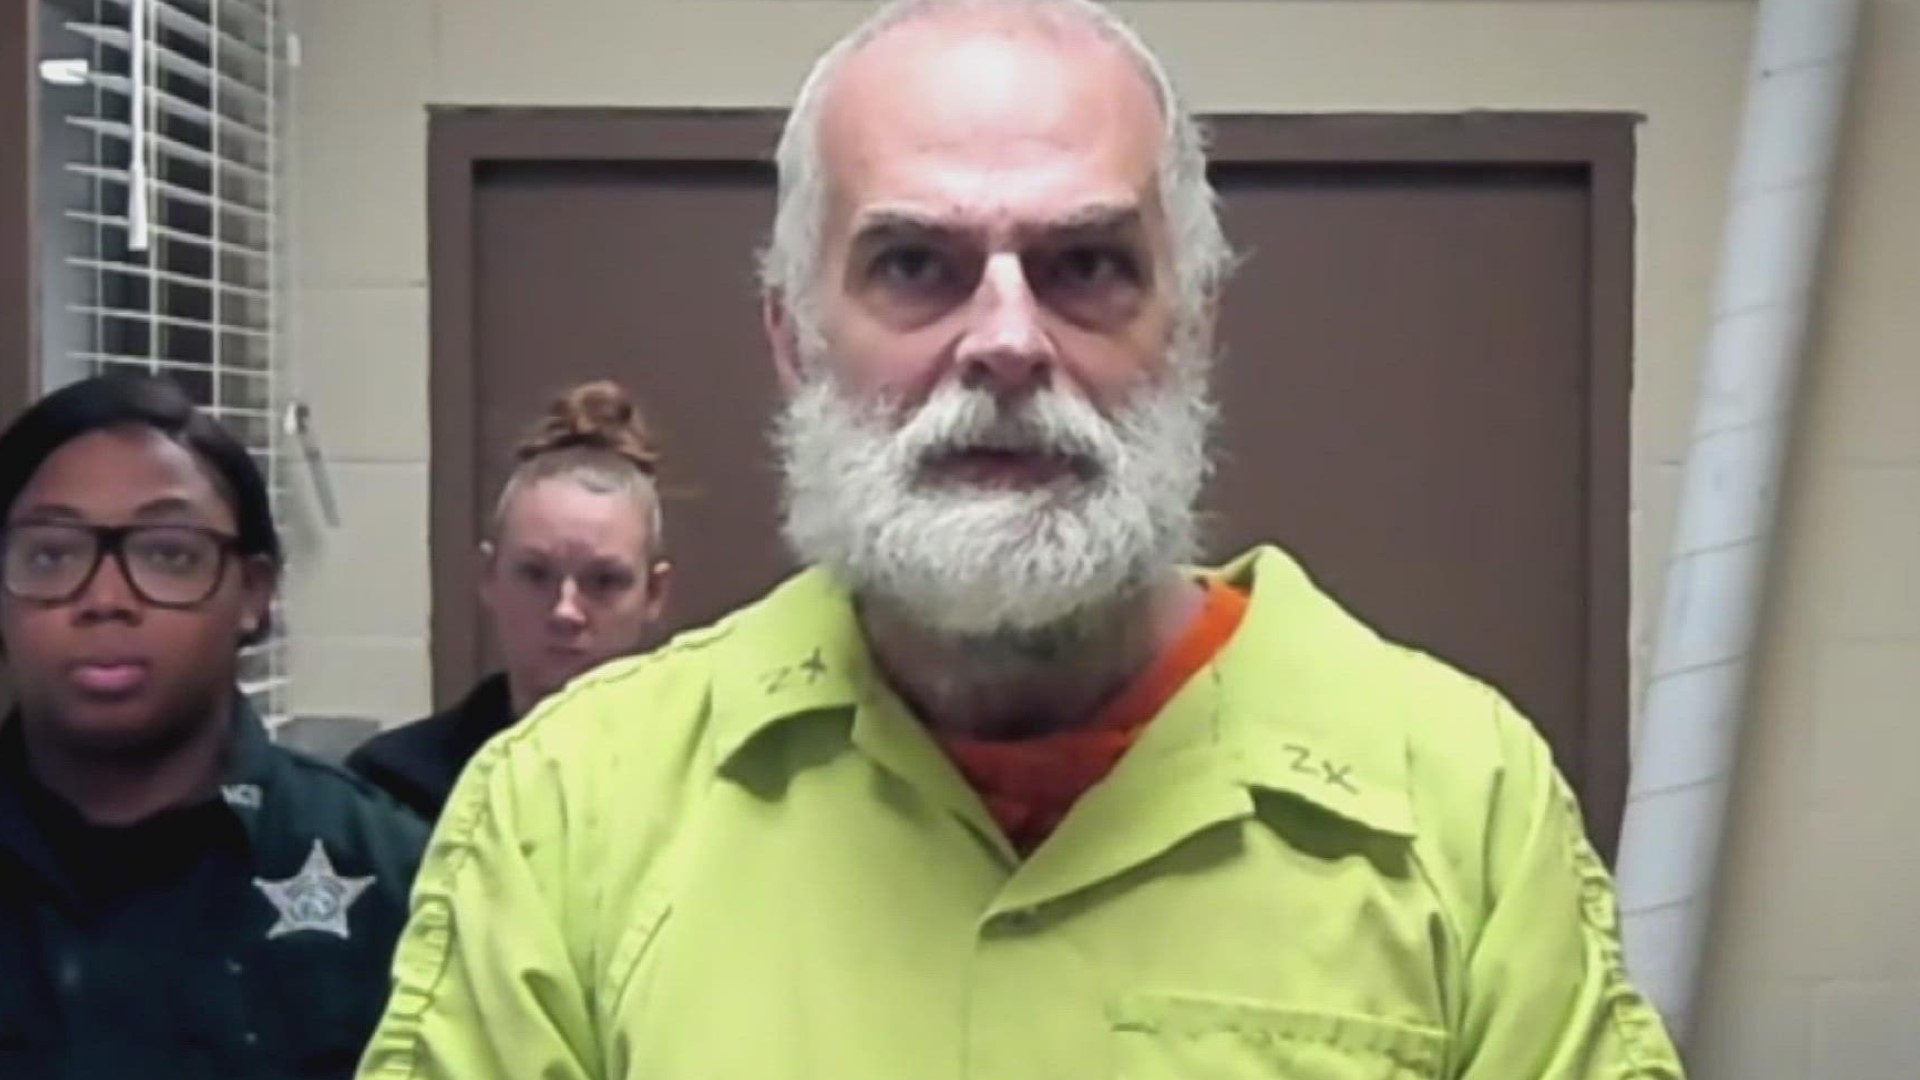 William Broyles, 57, charged with three counts of second-degree murder, will be evaluated for a third time to see if he is mentally competent to stand trial.